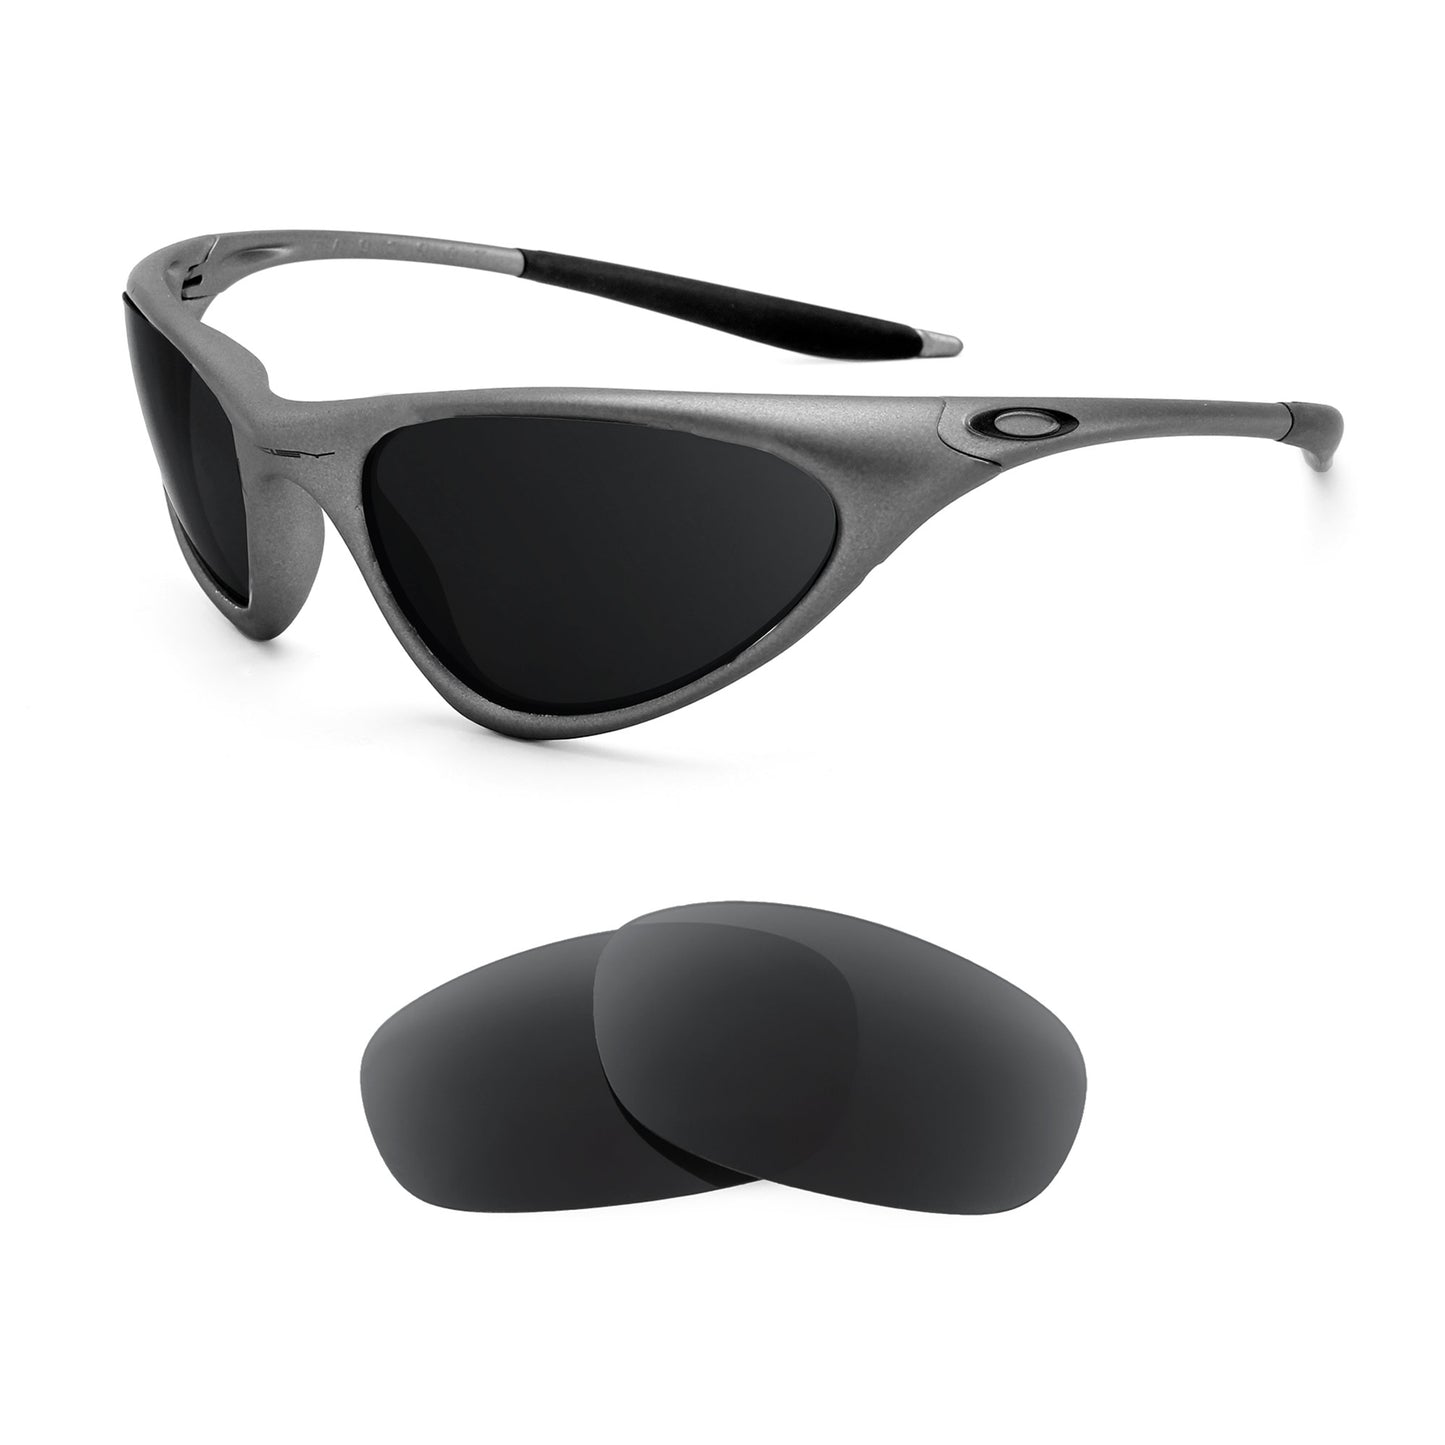 Oakley Topcoat sunglasses with replacement lenses